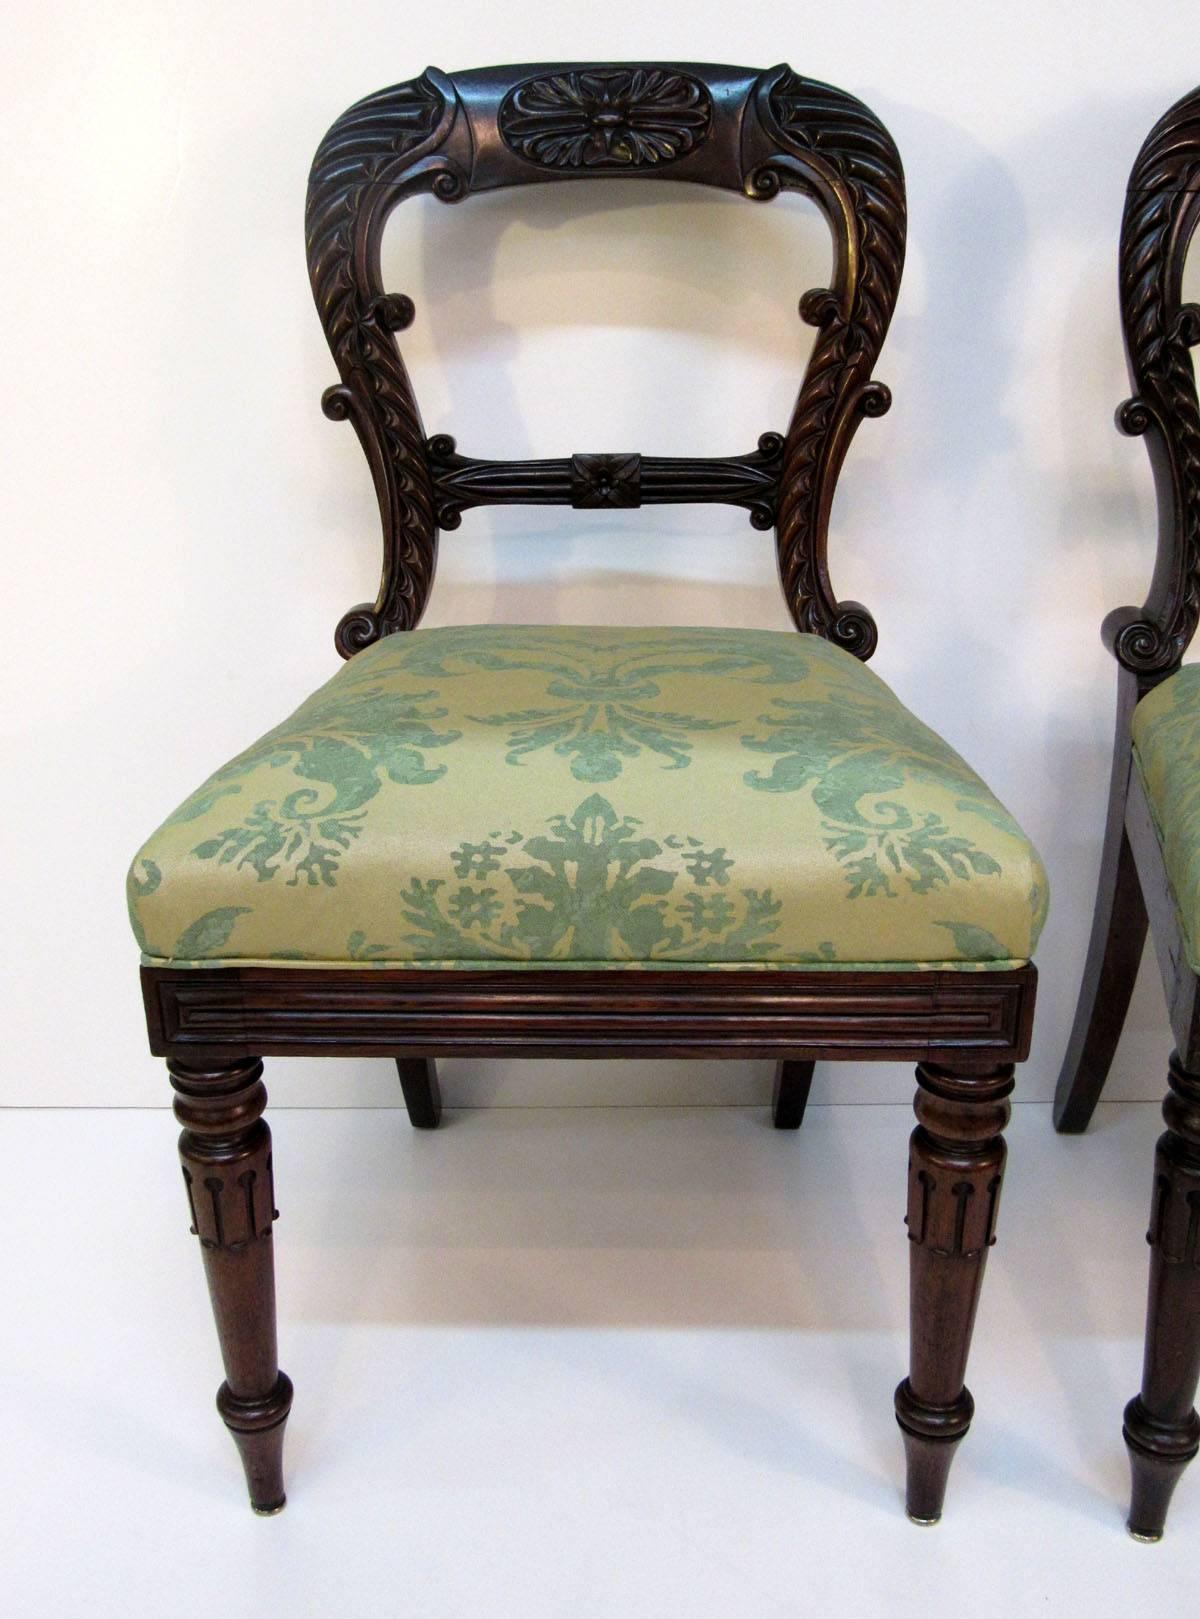 Pair of late 19th century English Regency side chairs with upholstered seats.